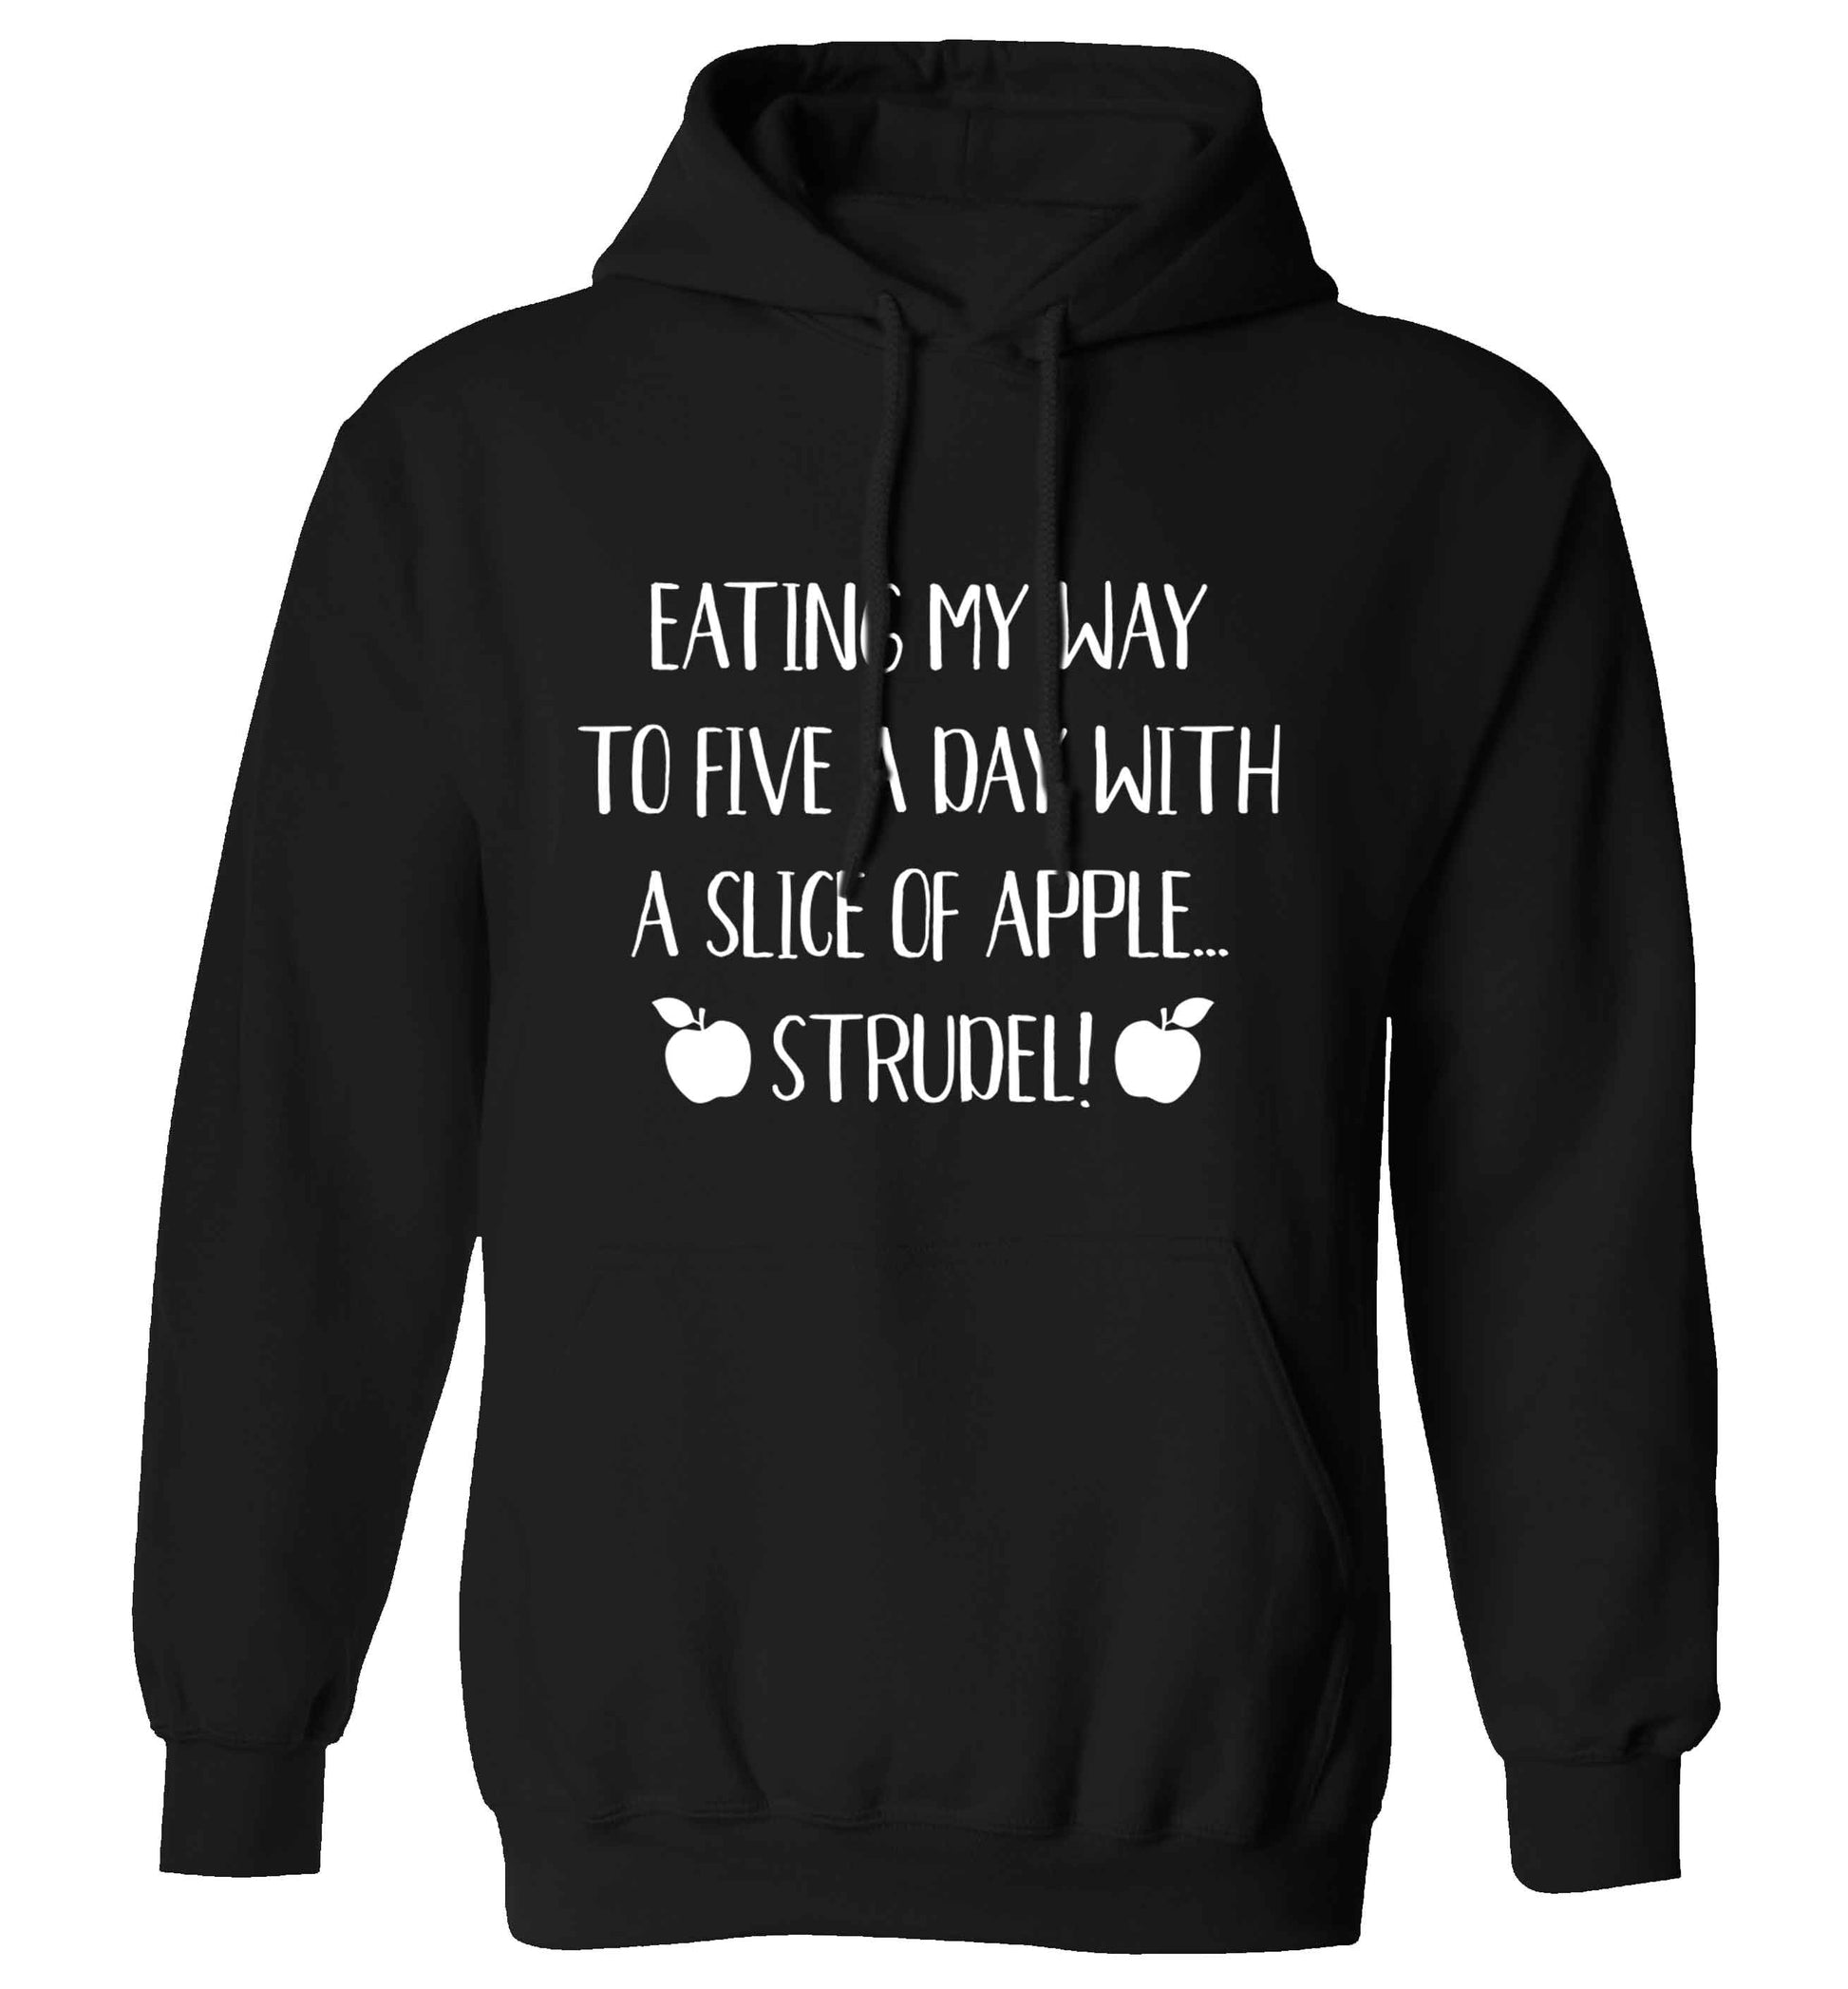 Eating my way to five a day with a slice of apple strudel adults unisex black hoodie 2XL